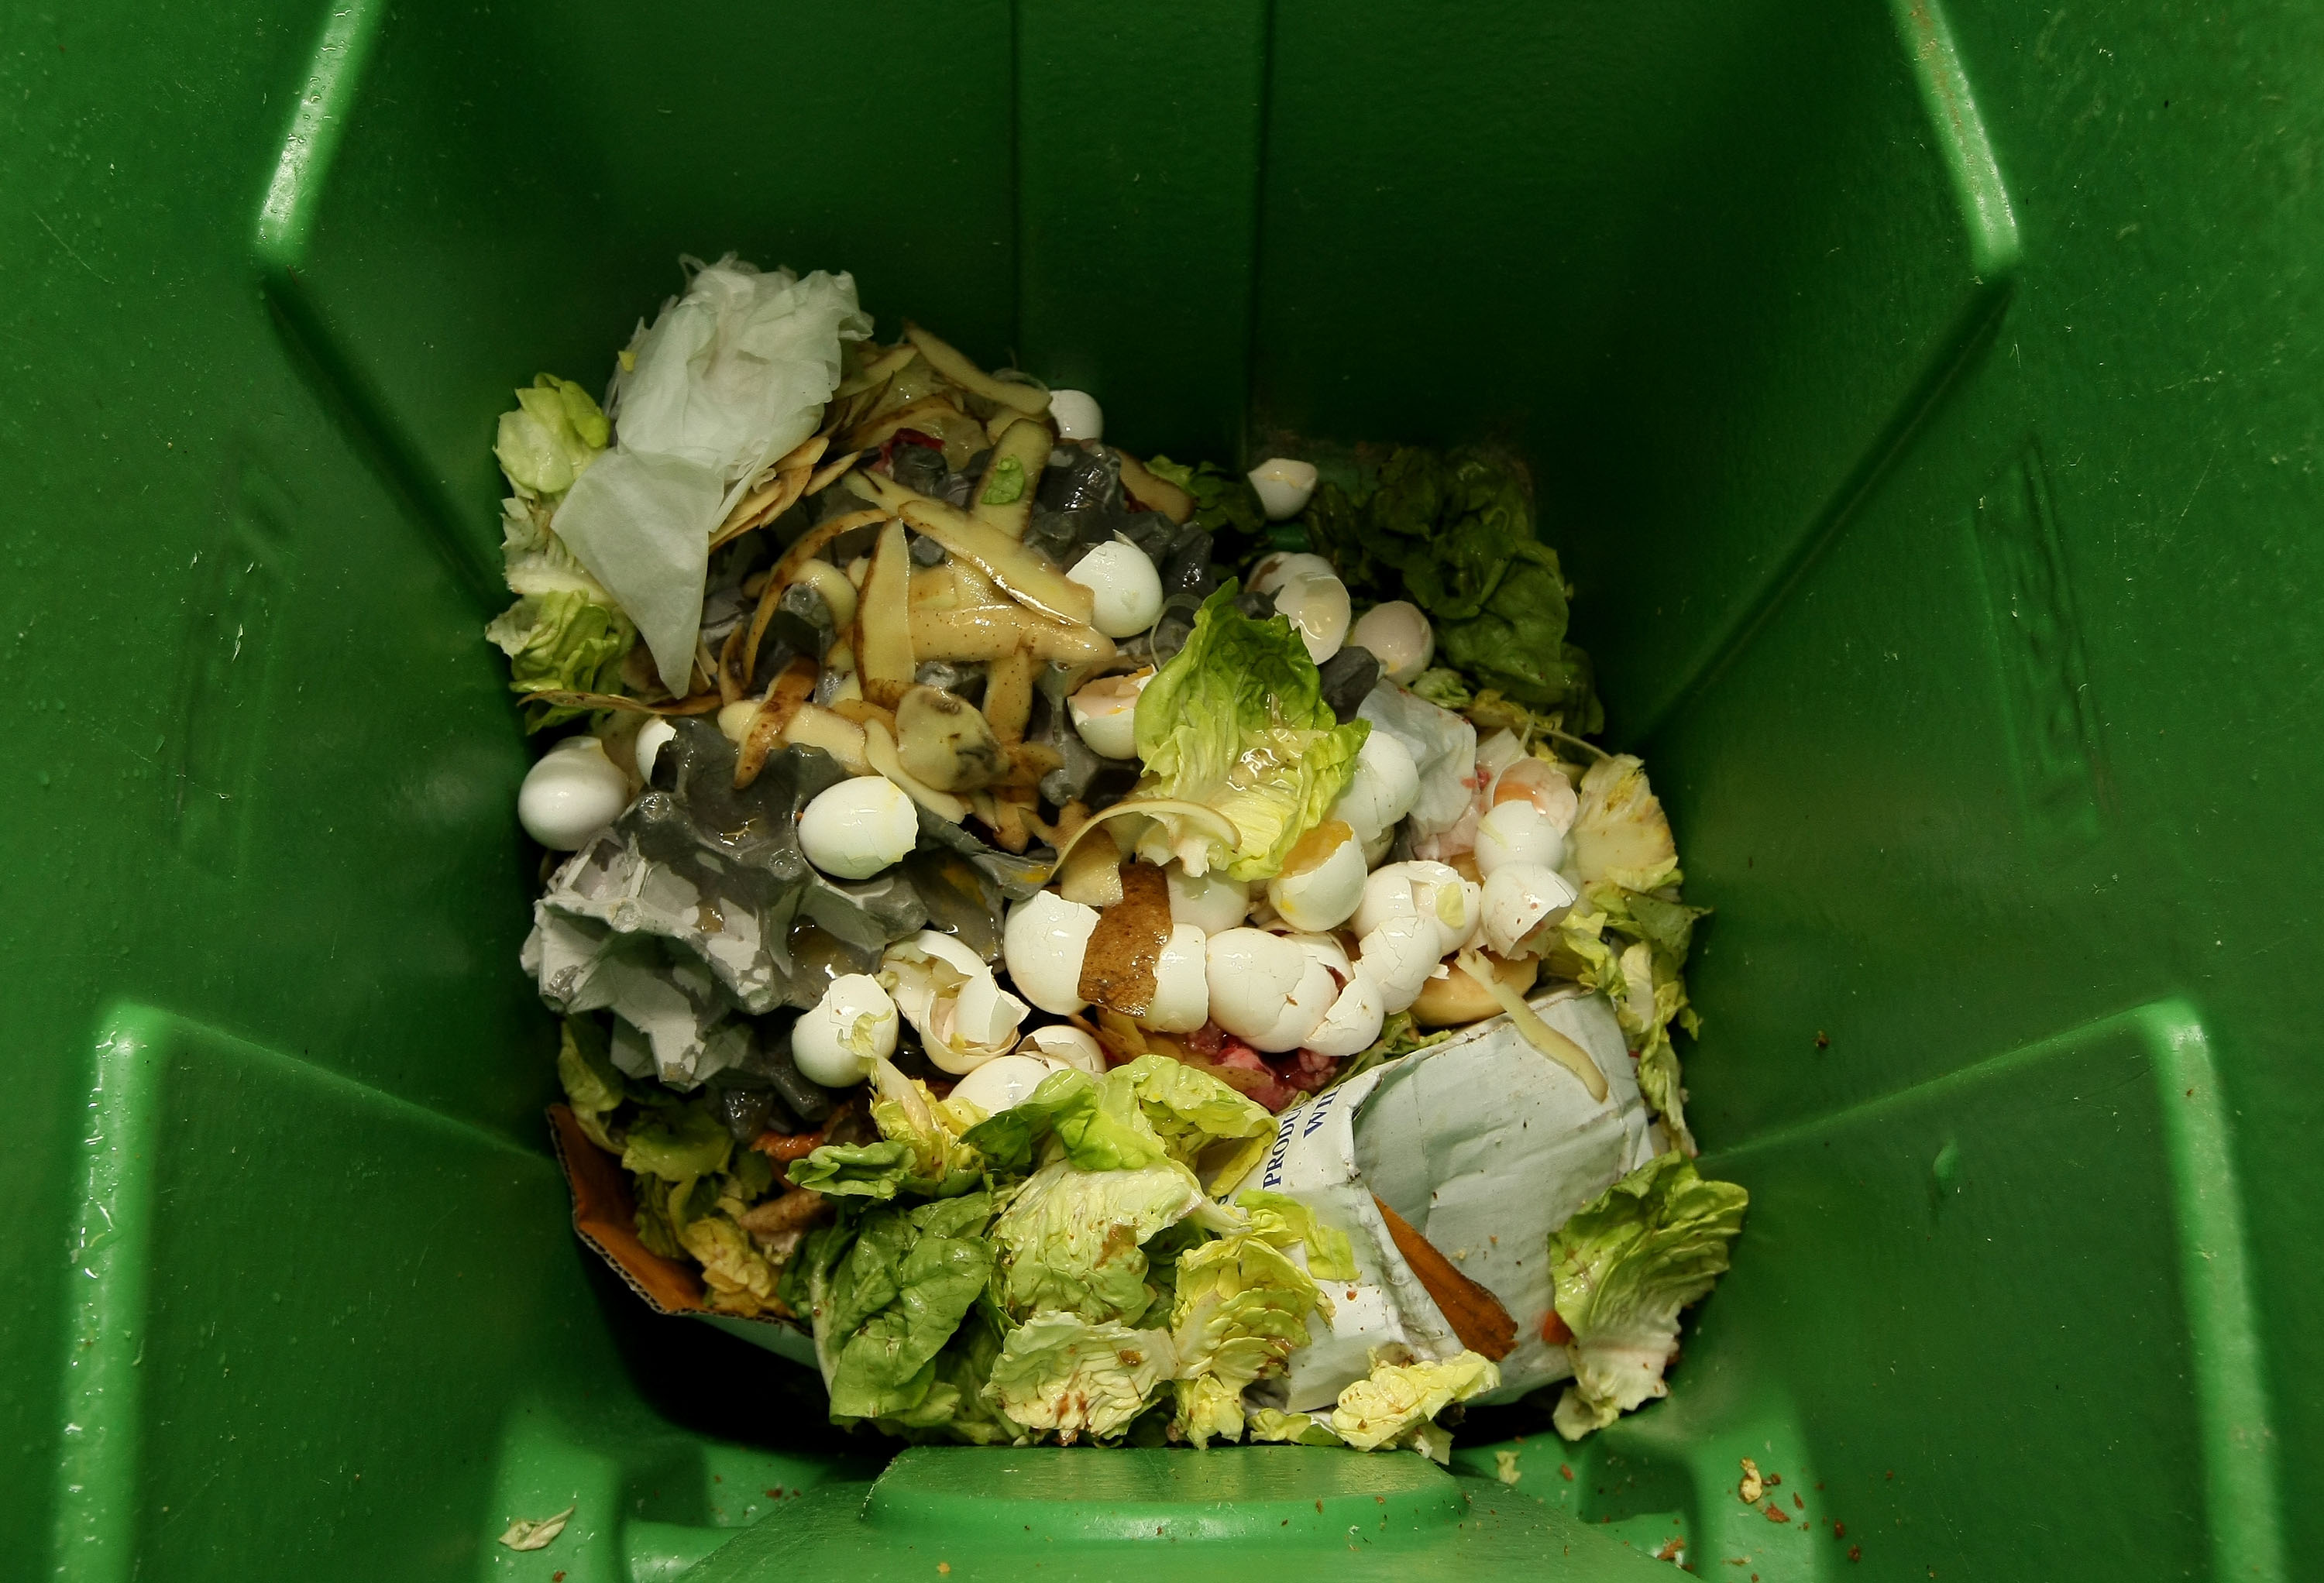 Delco compost program redirects thousands of pounds of food waste